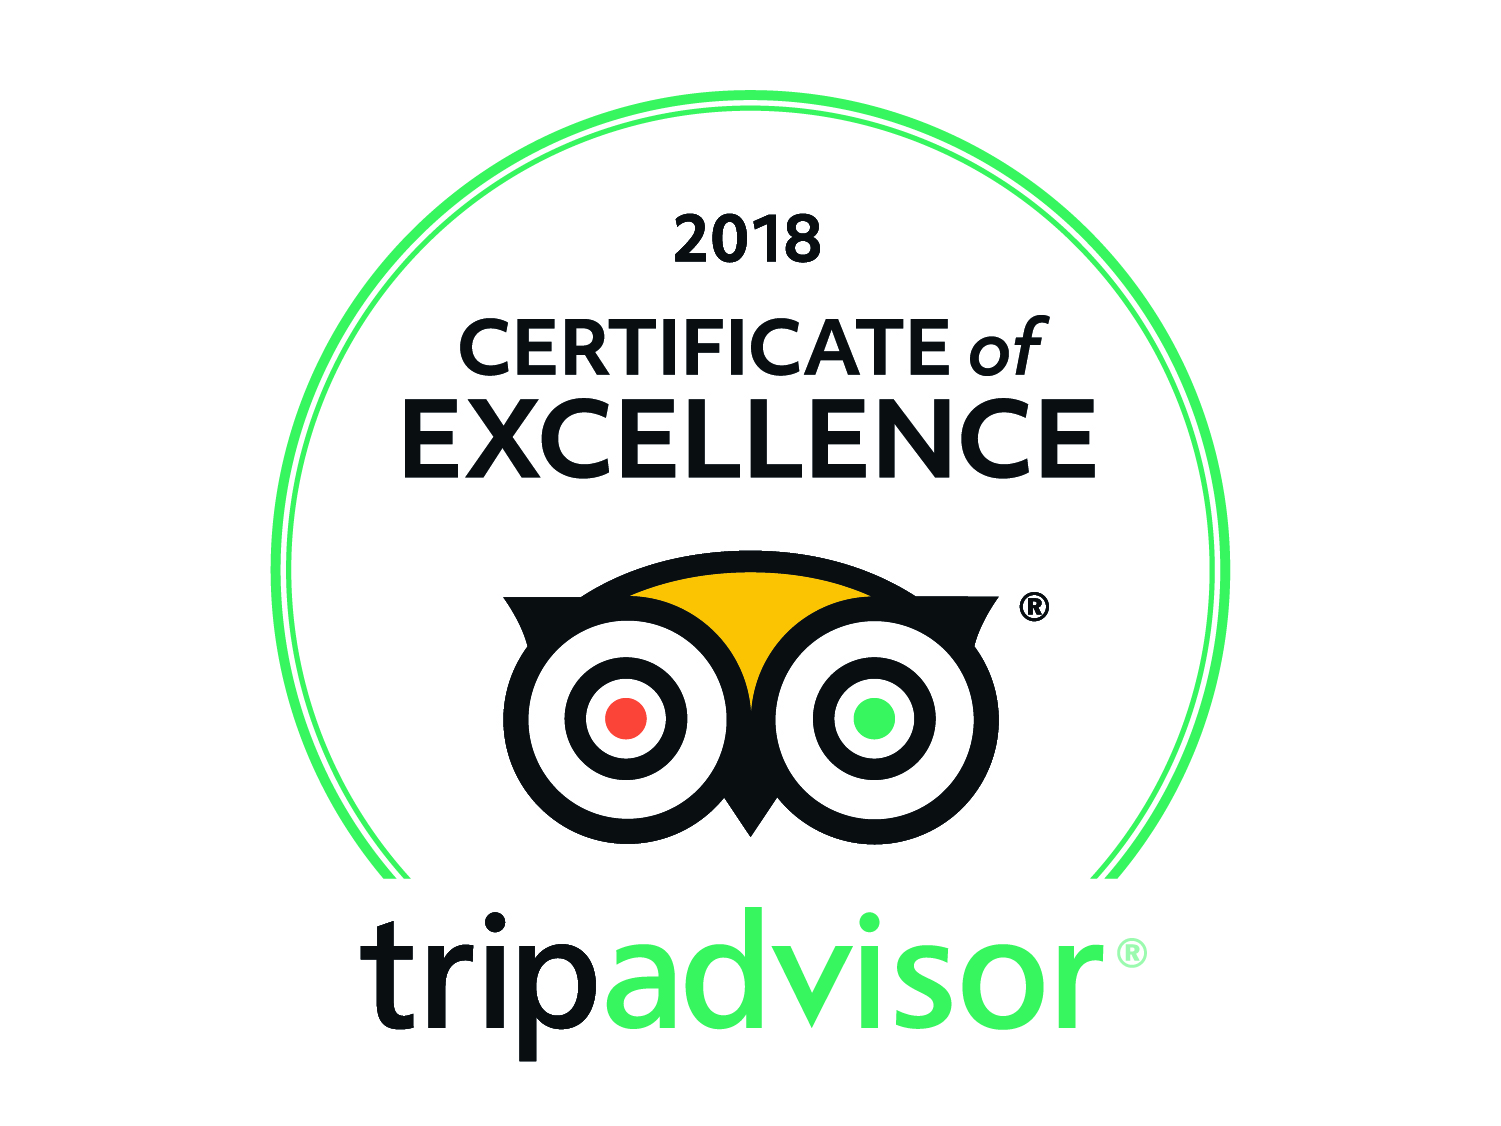 We have been awarded a Certificate of Excellence from Trip Advisor